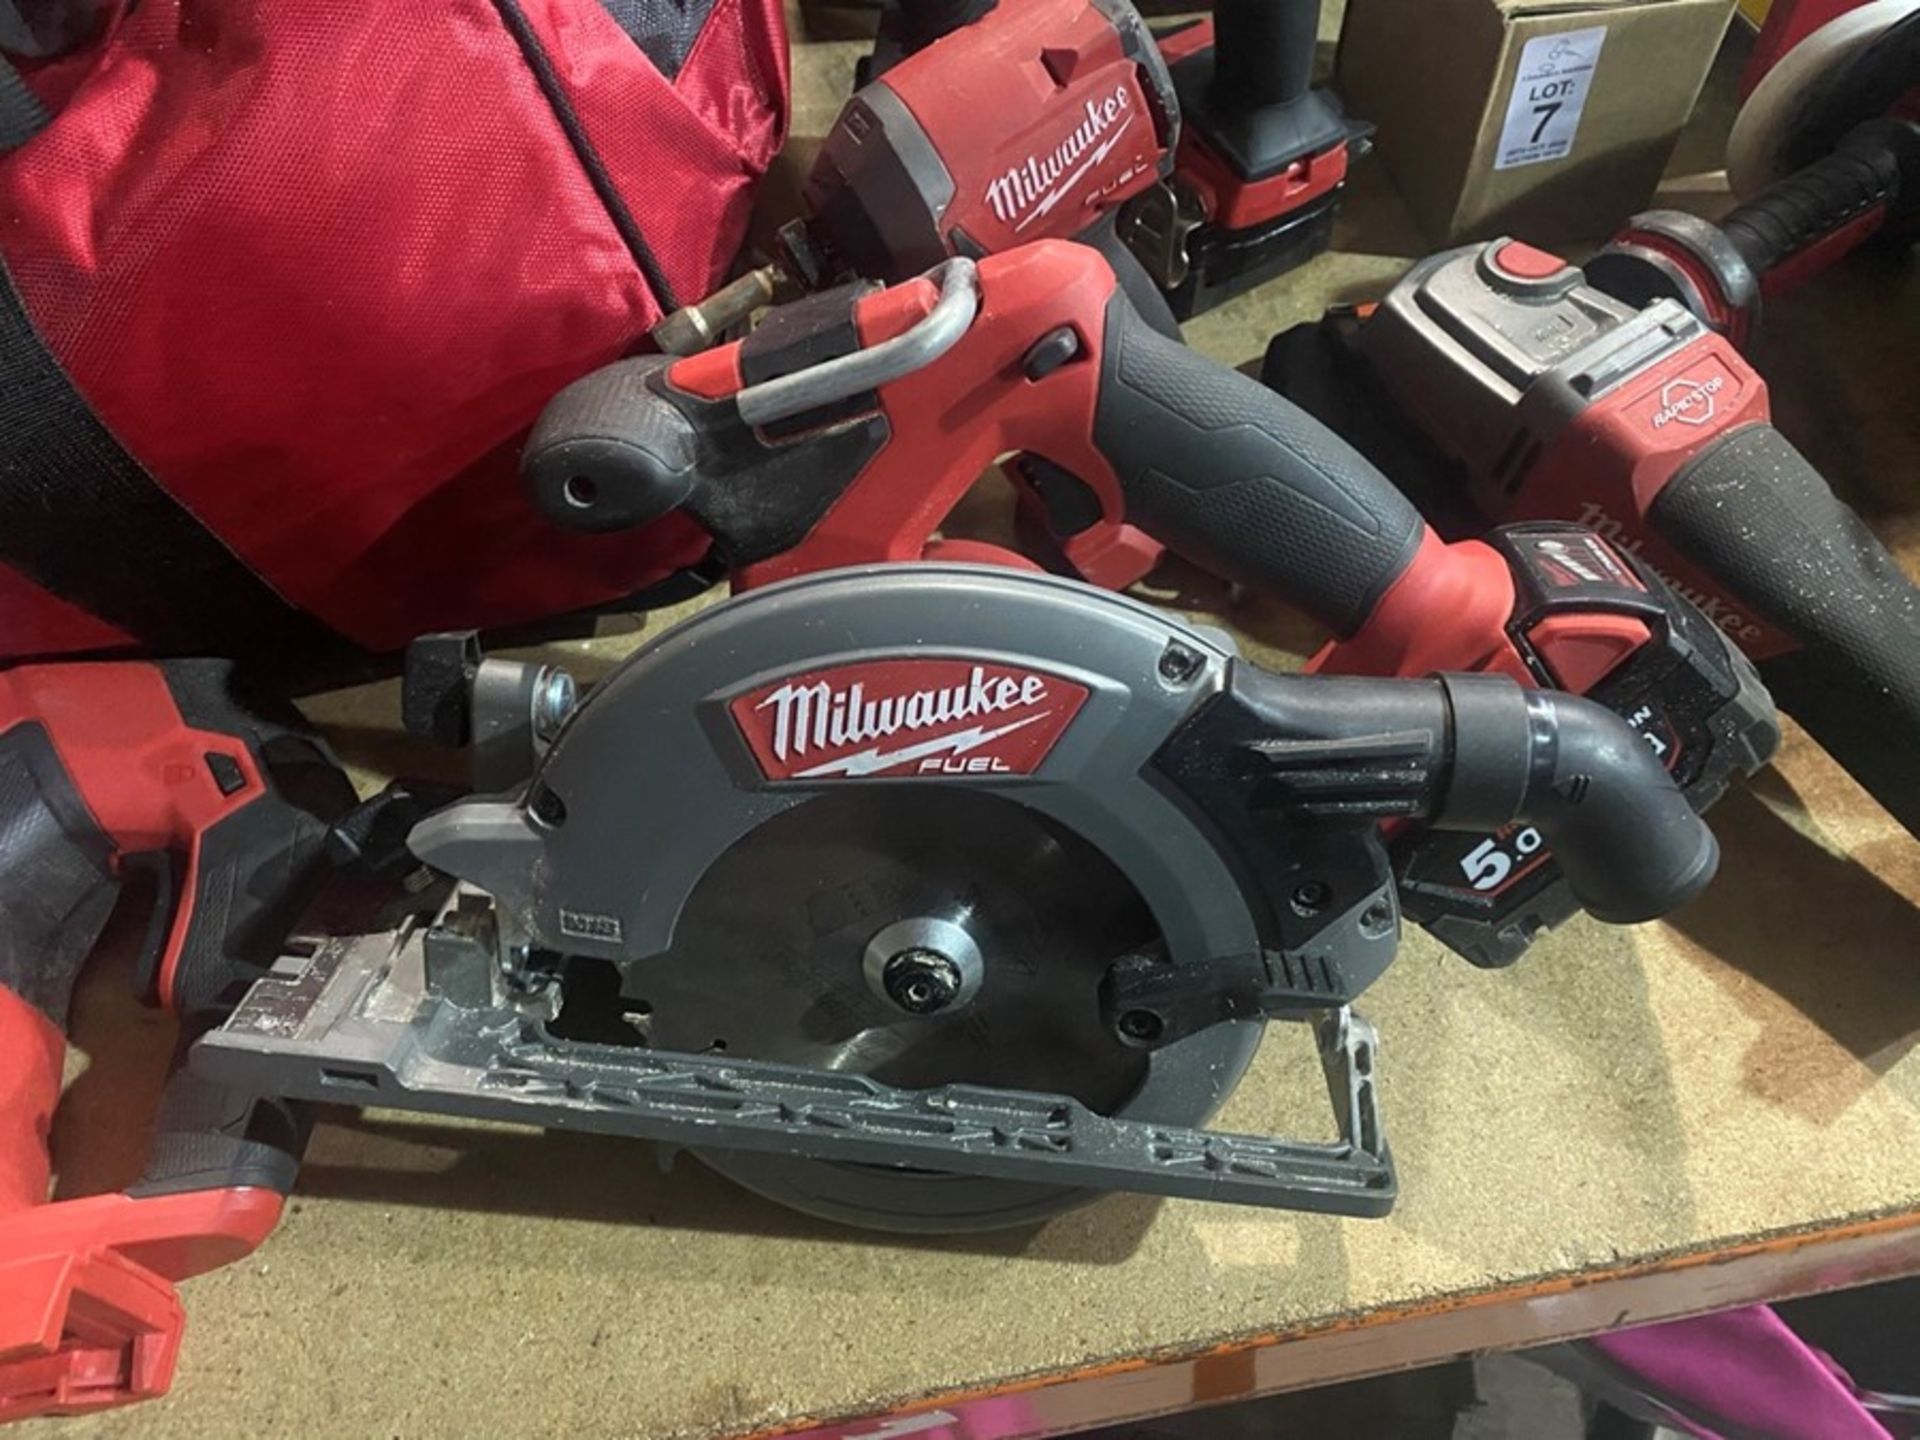 6 PIECE MILWAUKEE FULL KIT IMPACT DRILL,SAW,ANGLE GRINDER, TORCH, JIGSAW + 3 BATTERIES CHARGER AND - Image 3 of 6